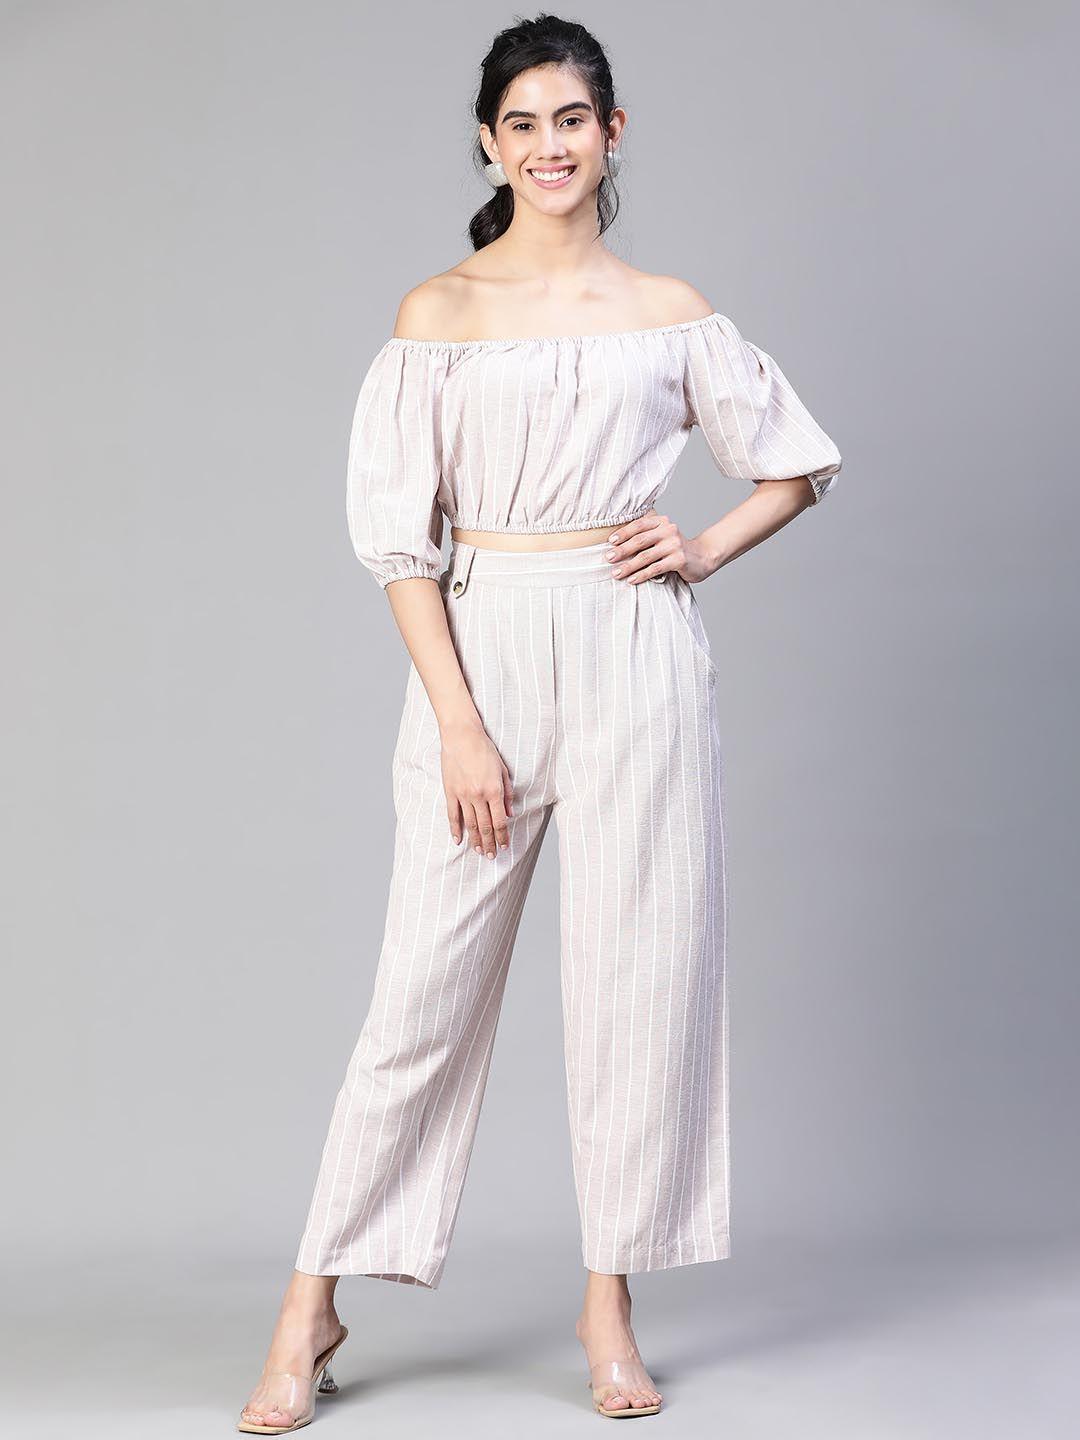 oxolloxo off-shoulder cotton top & trouser co-ord set